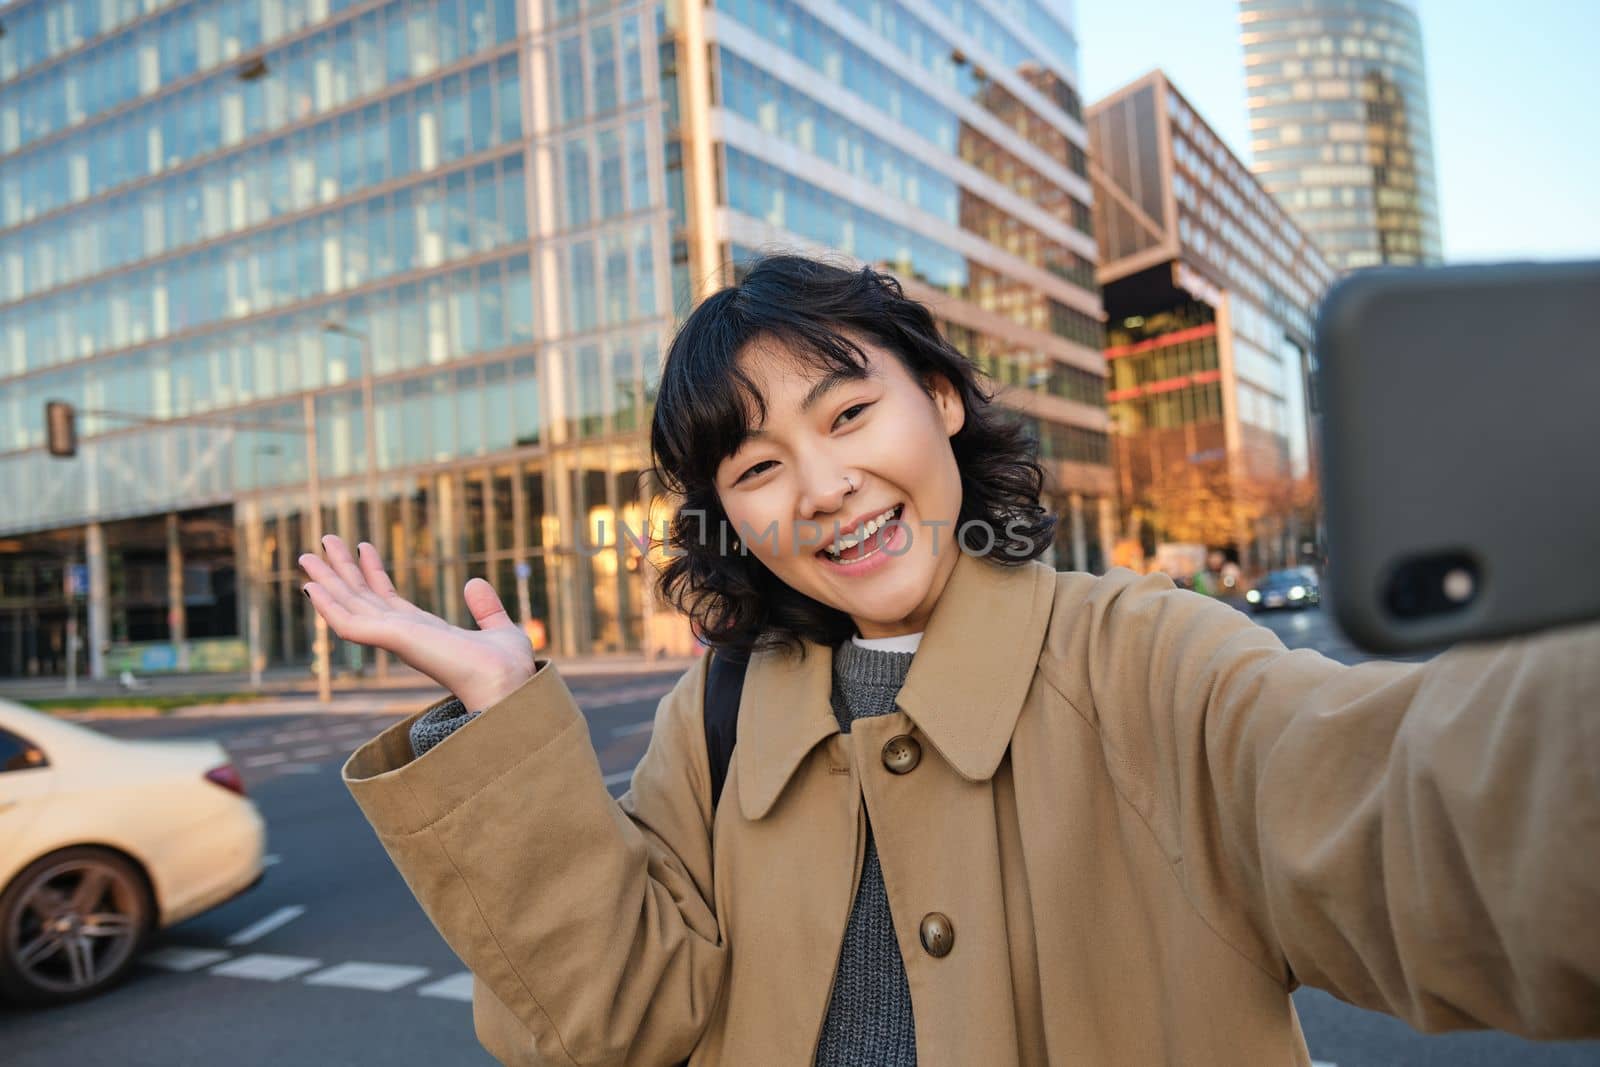 Smiling korean girl showing city, taking selfie in front of buildings on street with happy face, takes photos on her smartphone camera.